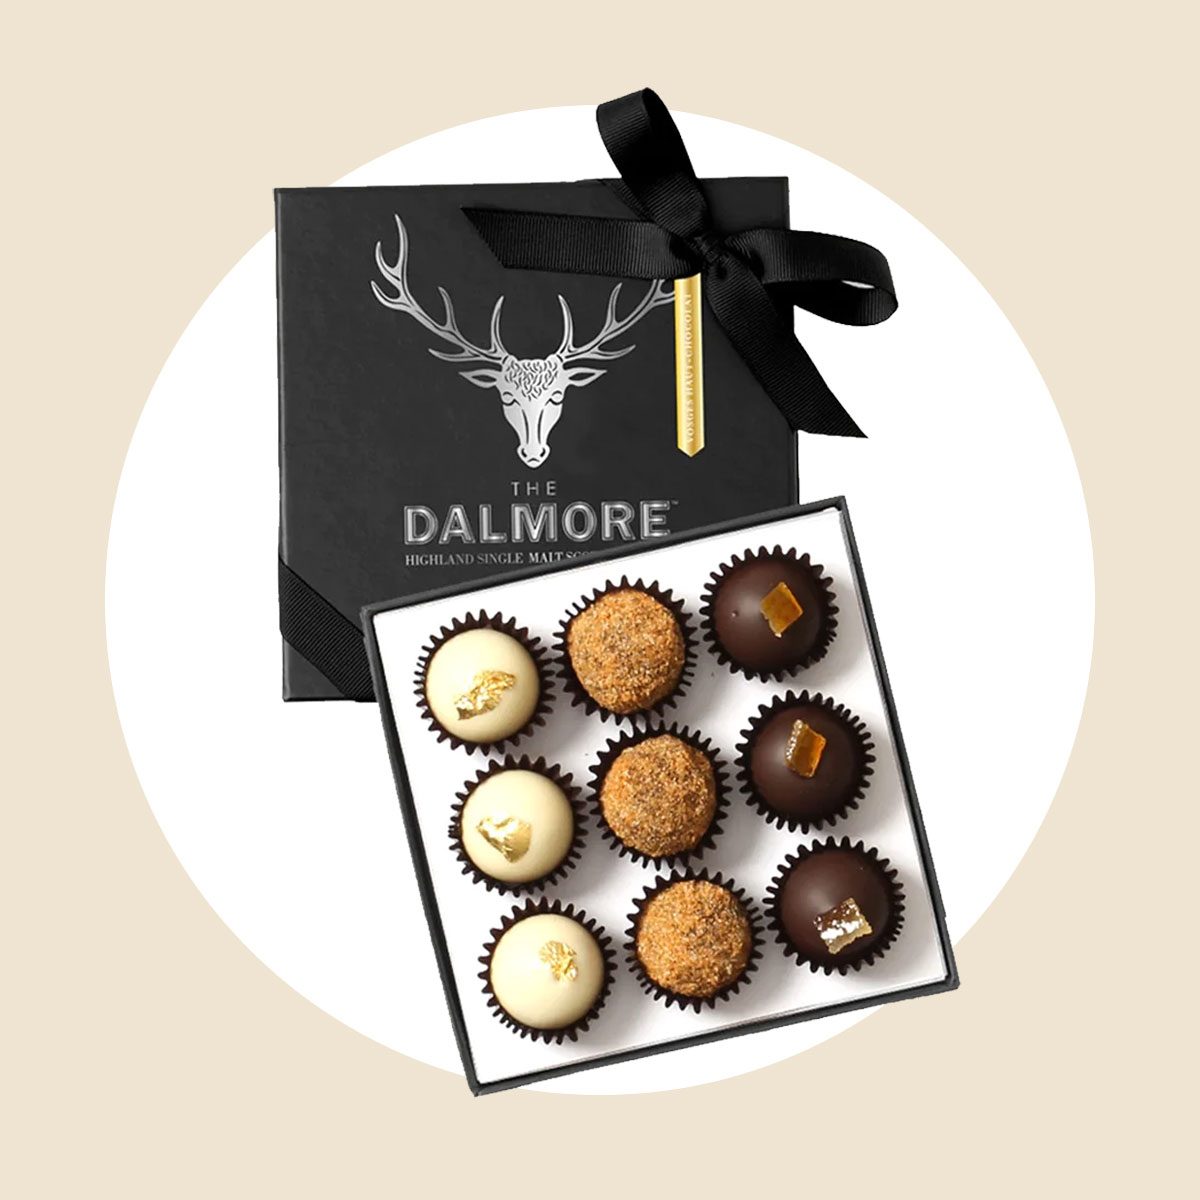 Vosges Haut Chocolat The Dalmore Scotch Infused Chocolate Collection